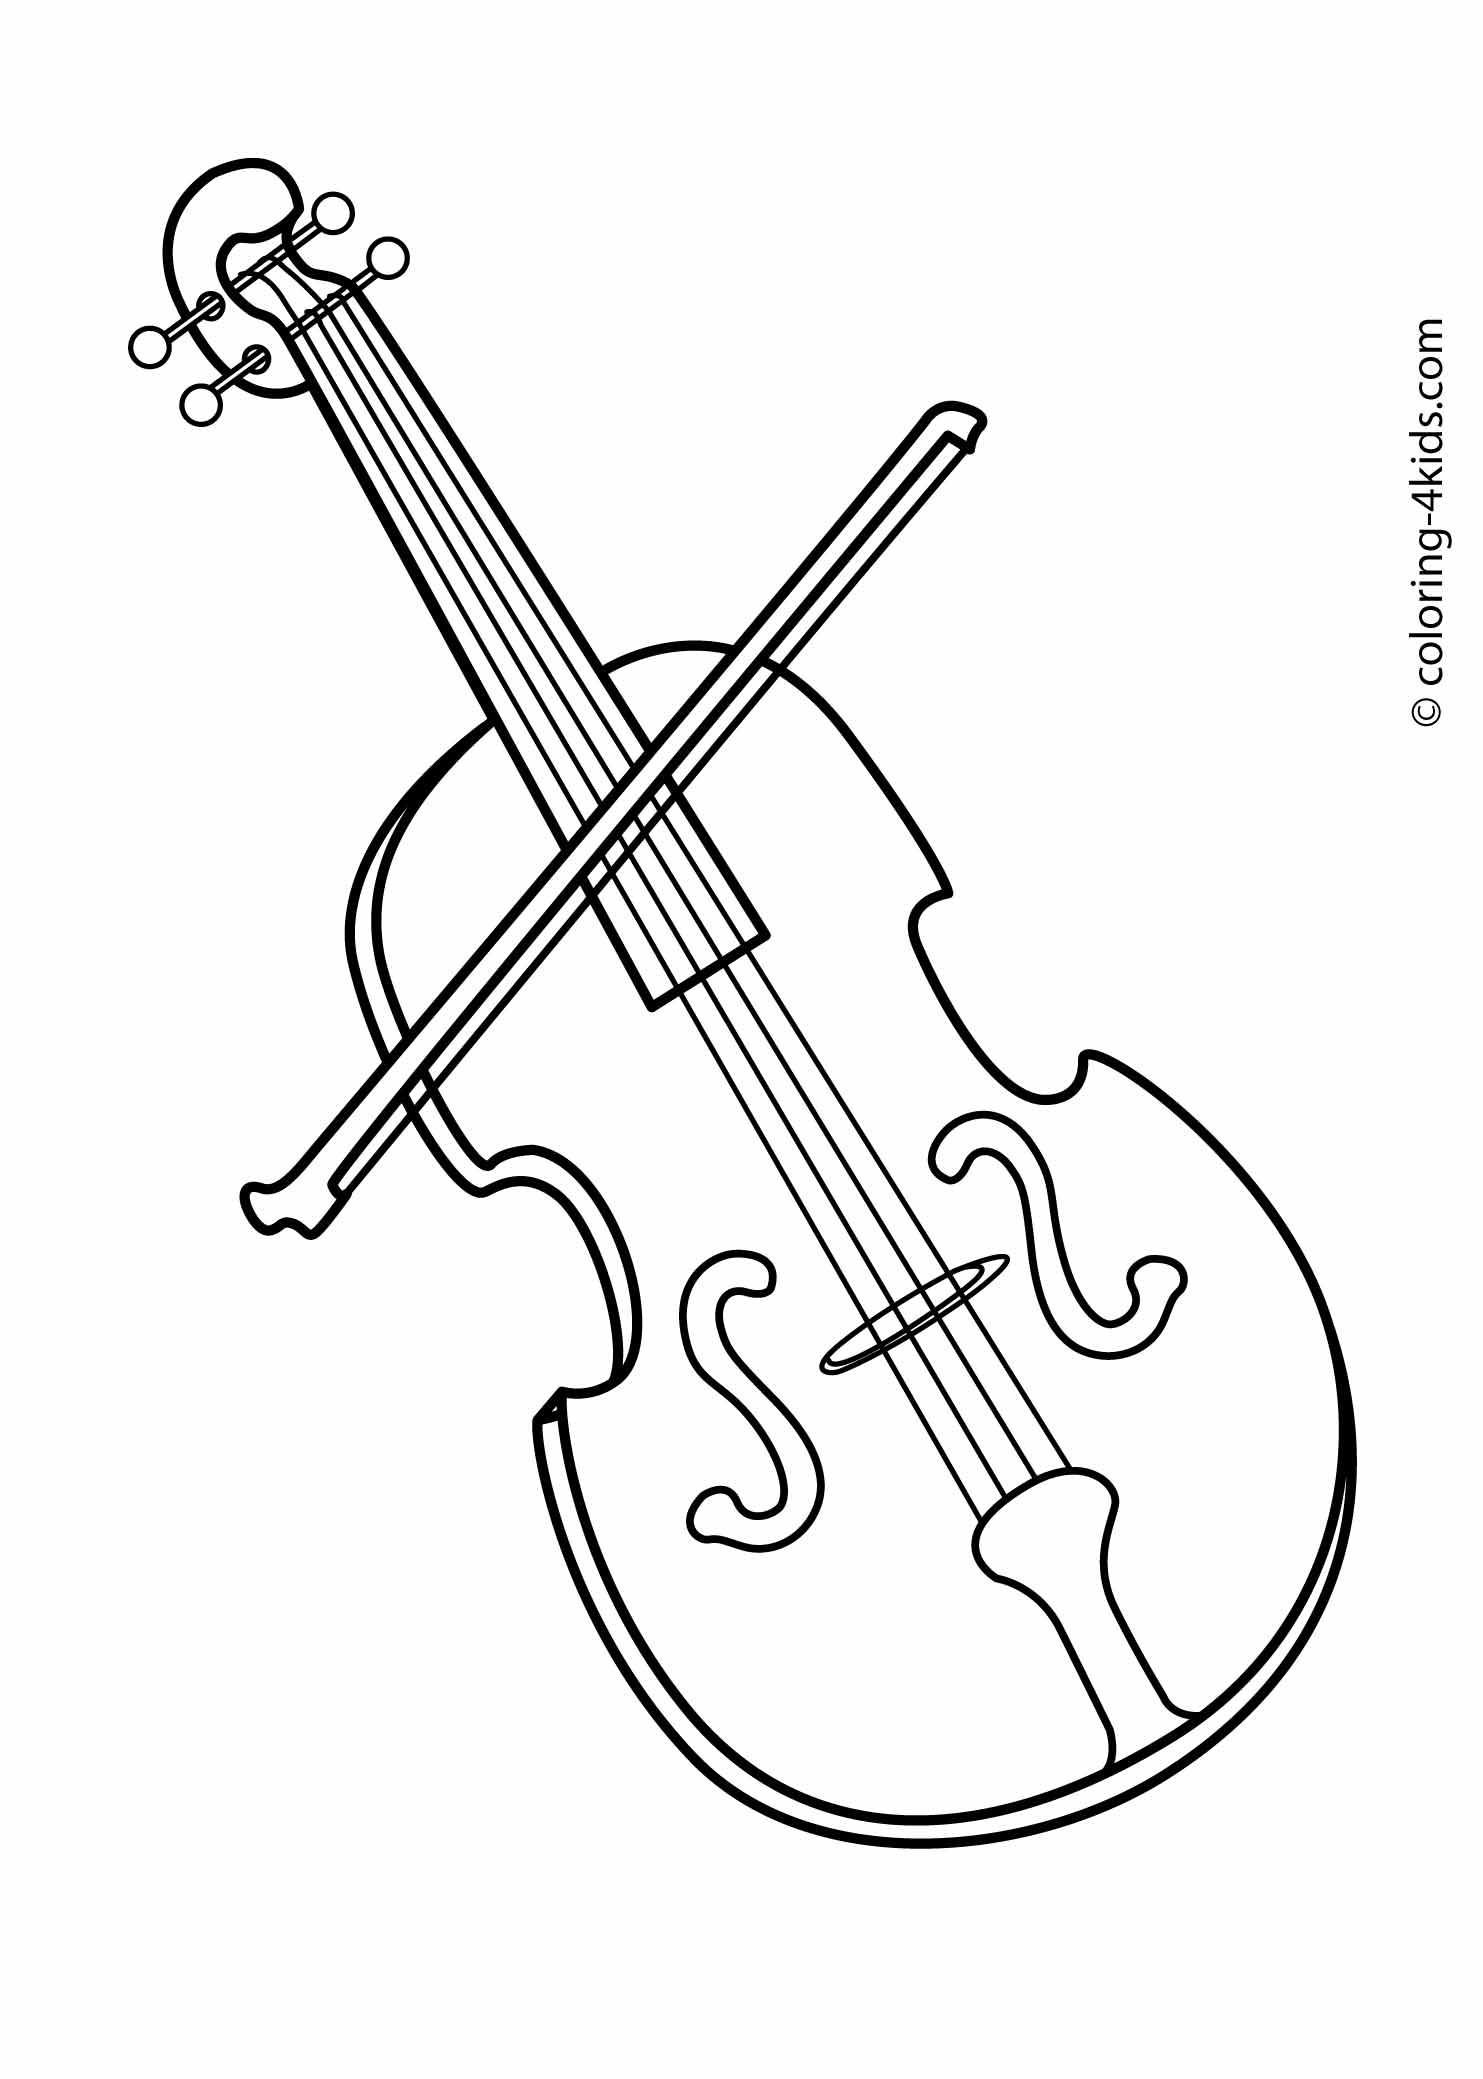 Violin musical instruments coloring pages for kids, printable 